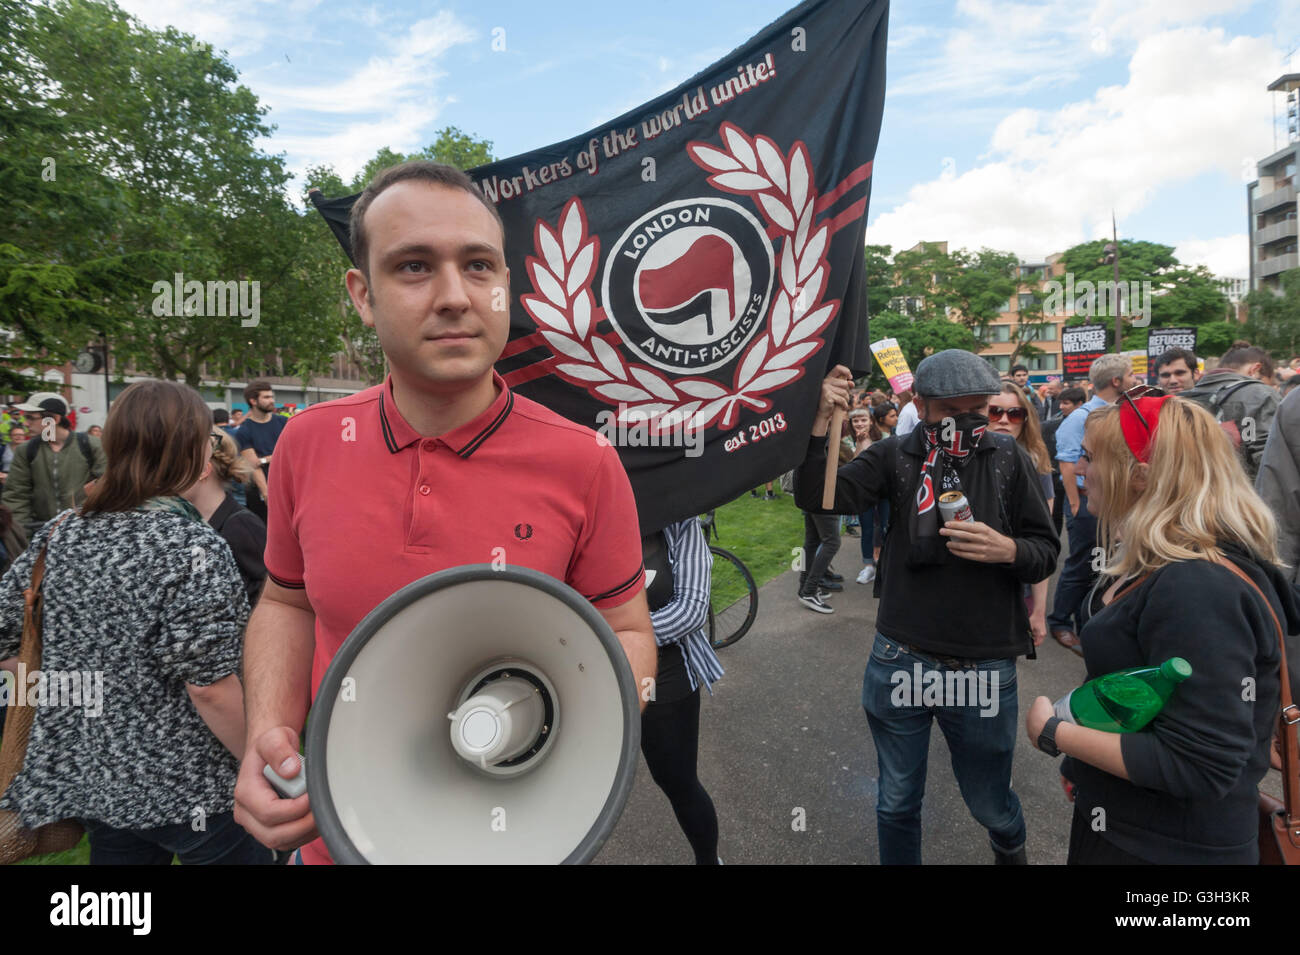 London, UK. June 24th 2016. After a rally in Altab Ali Park, well over a thousand protesters set off on a long march to the offices of News International on the day after the UK voted to leave the EU. They were protesting against racism, for migrant rights and against fascist violence and argue that migration and immigrants have been attacked and scapegoated not only by both Remain and Leave campaigns but by mainstream parties and media over more than 20 years, stoking up hatred by insisting immigrants are a 'problem'. Peter Marshall/Alamy Live News Stock Photo